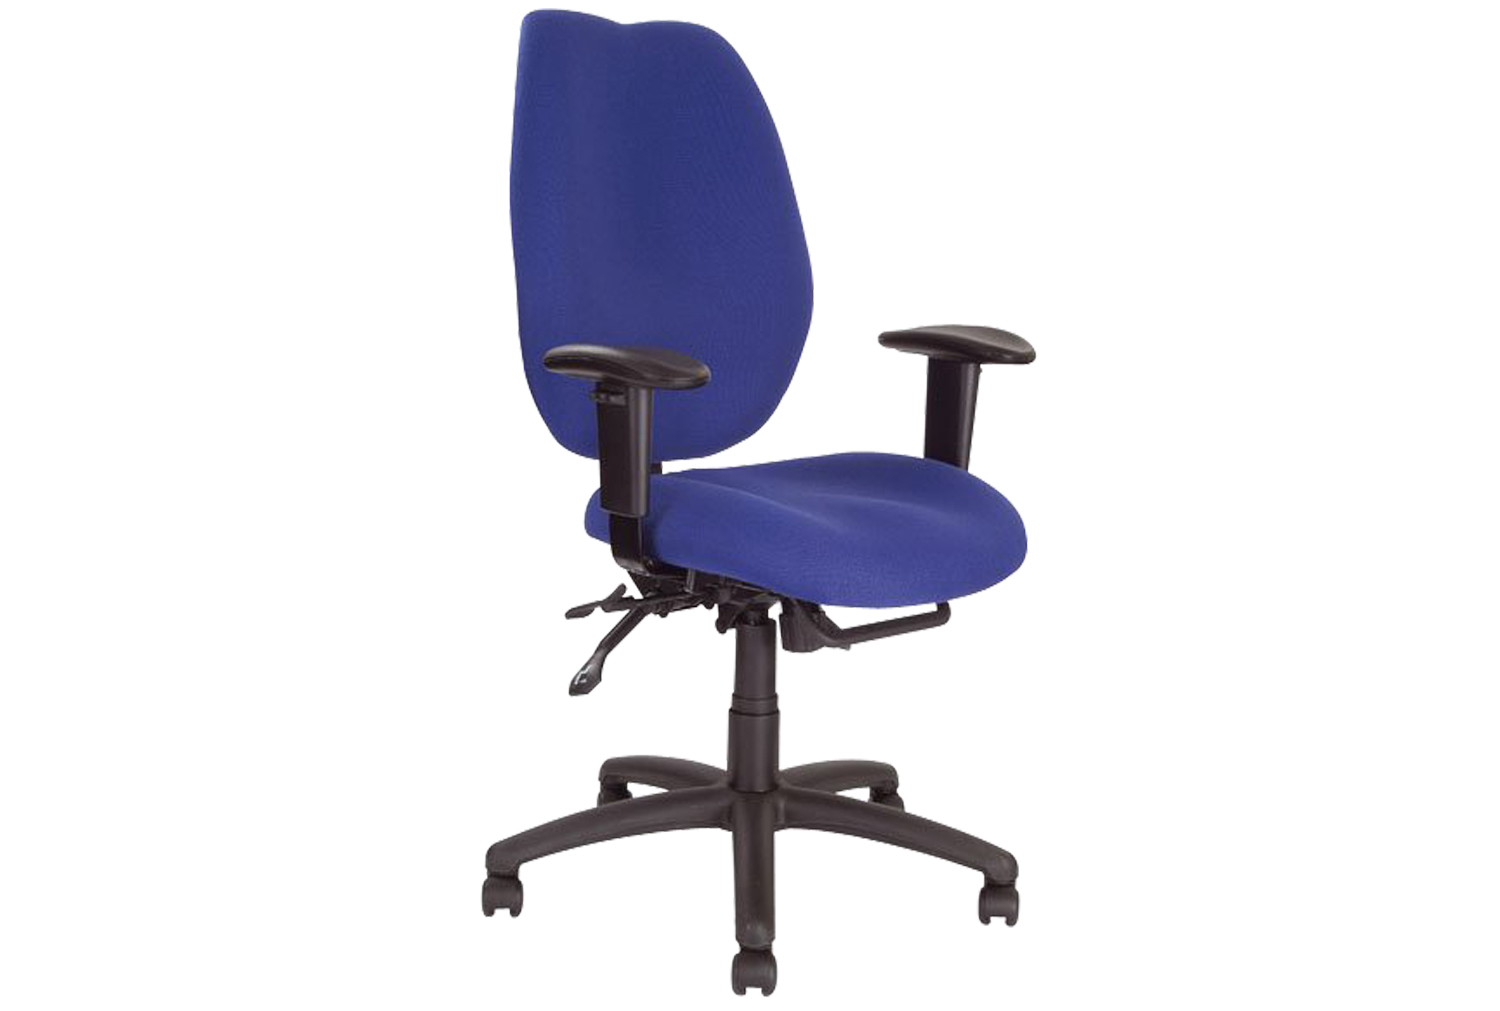 24 Hour High Back Ergonomic Operator Office Chair, Blue, Express Delivery